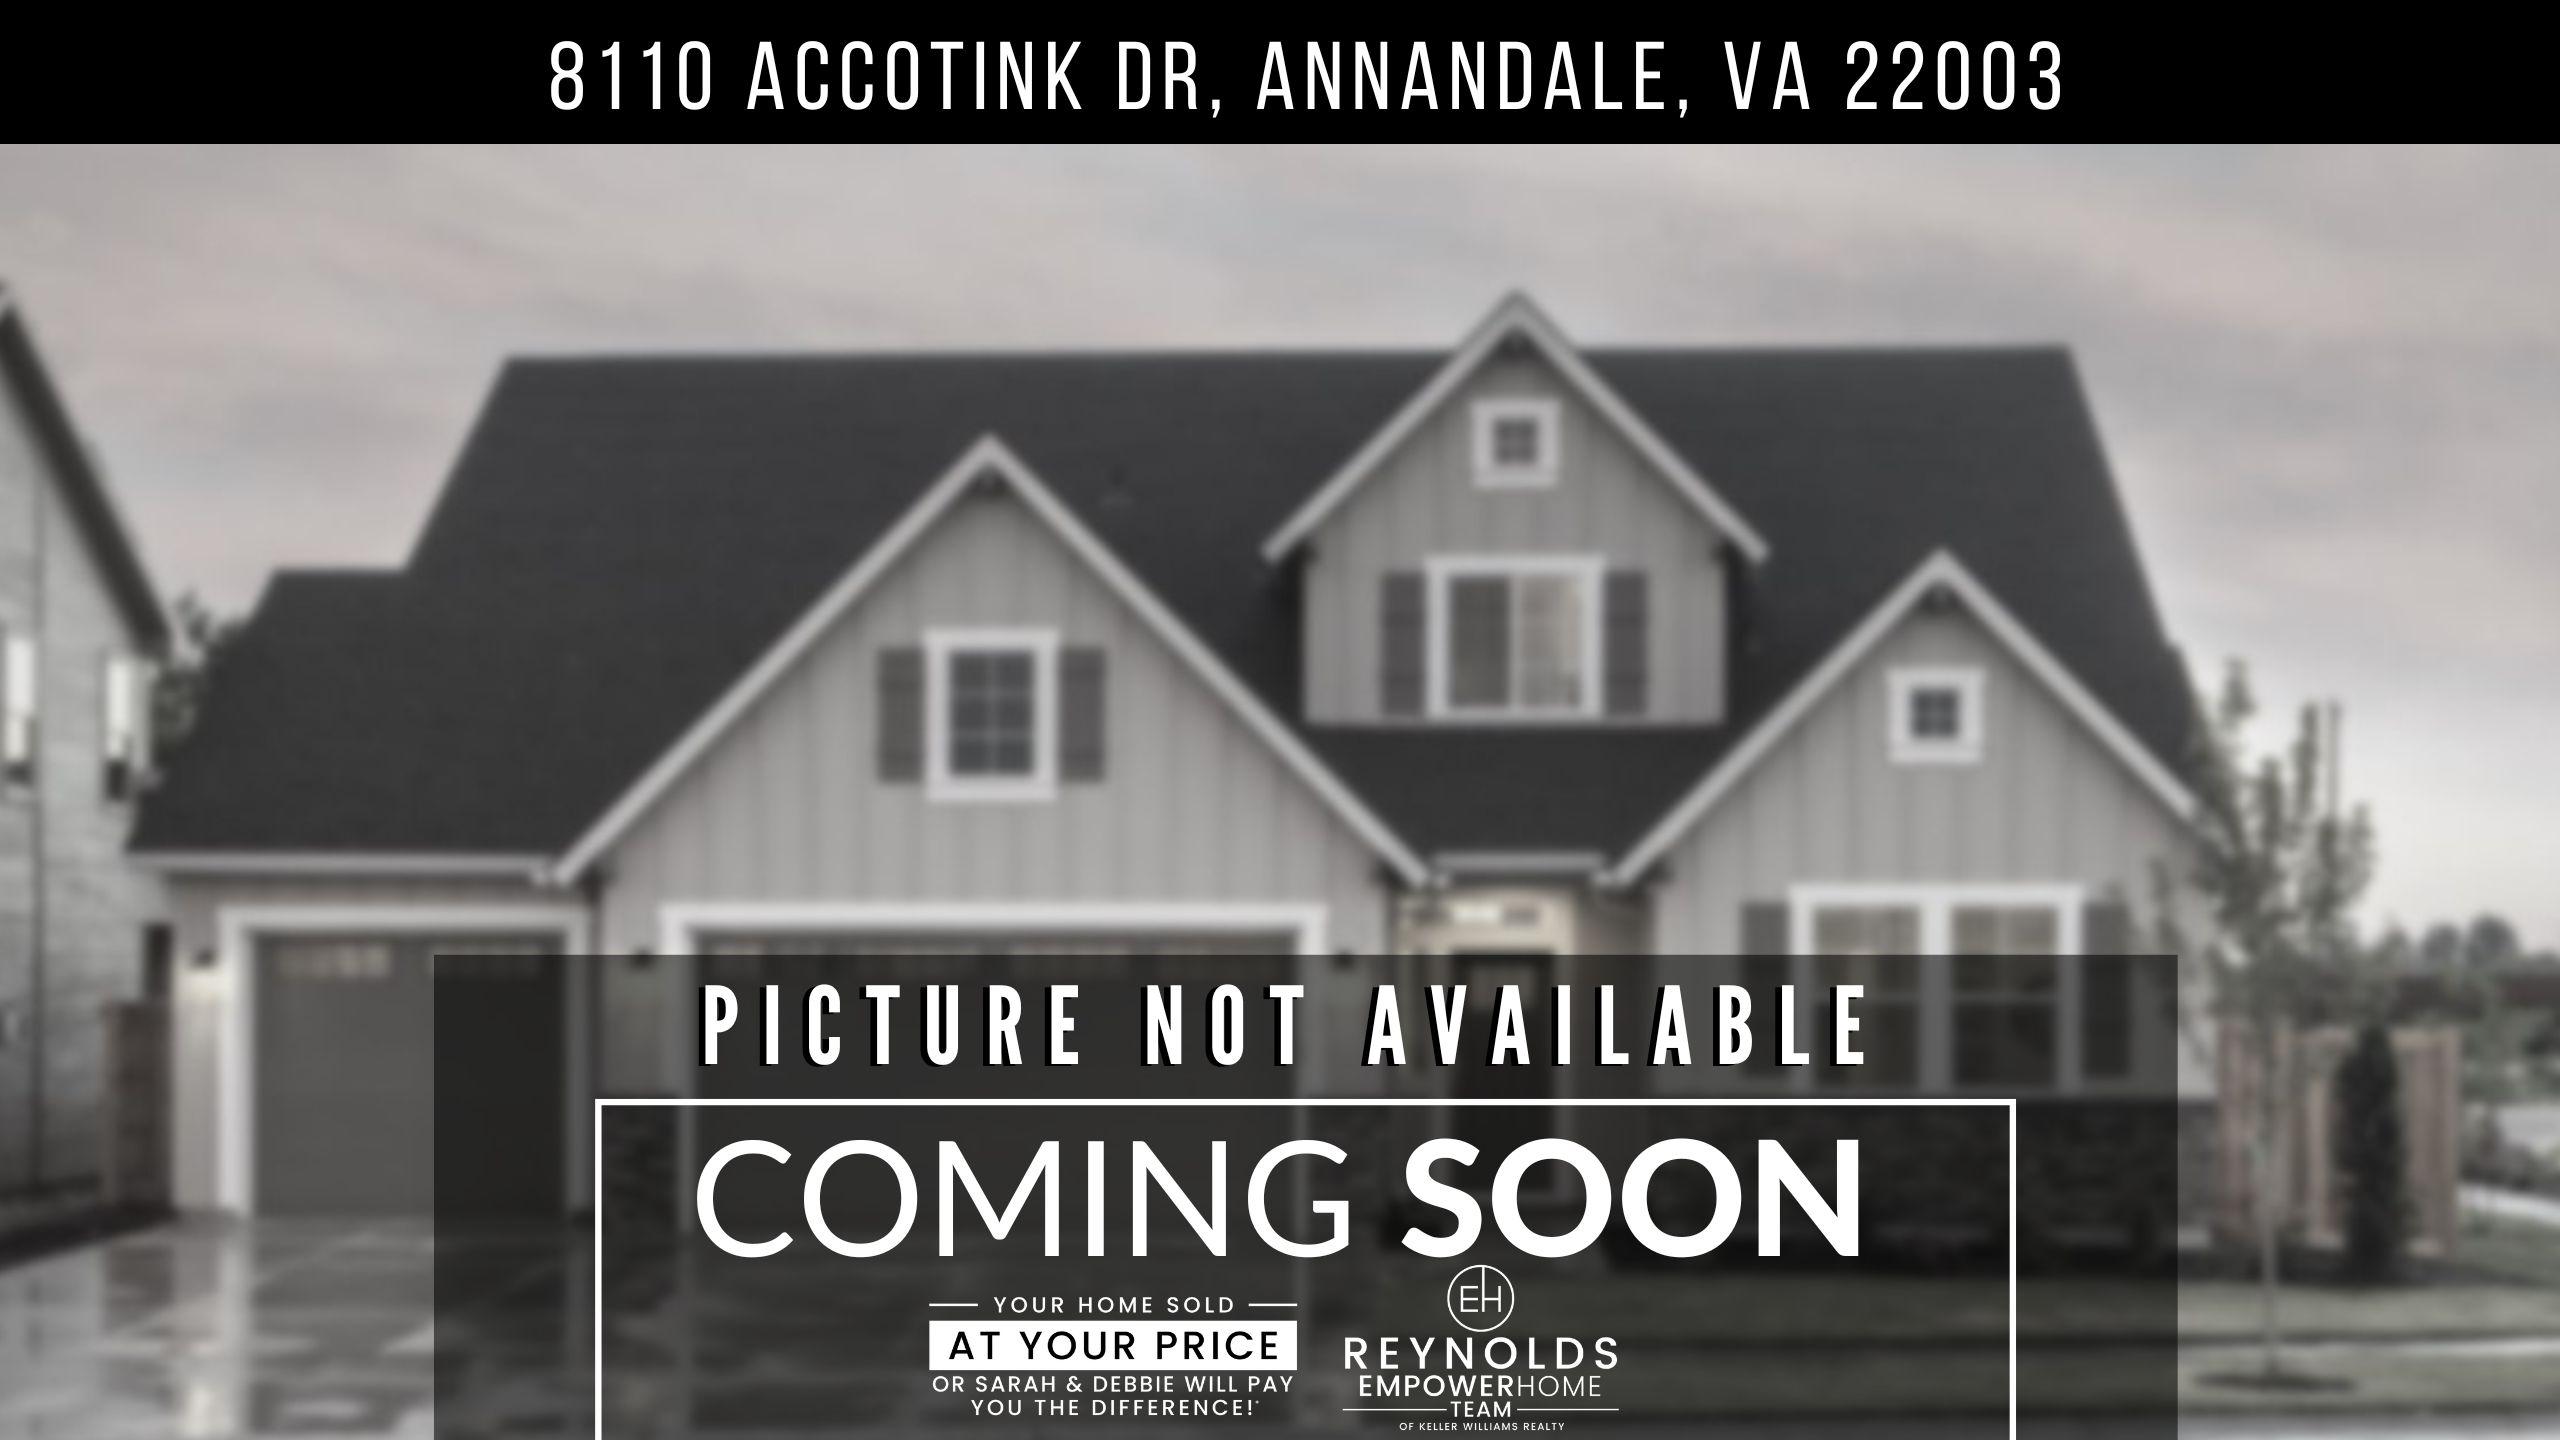 8110 Accotink Dr, Annandale, VA 22003